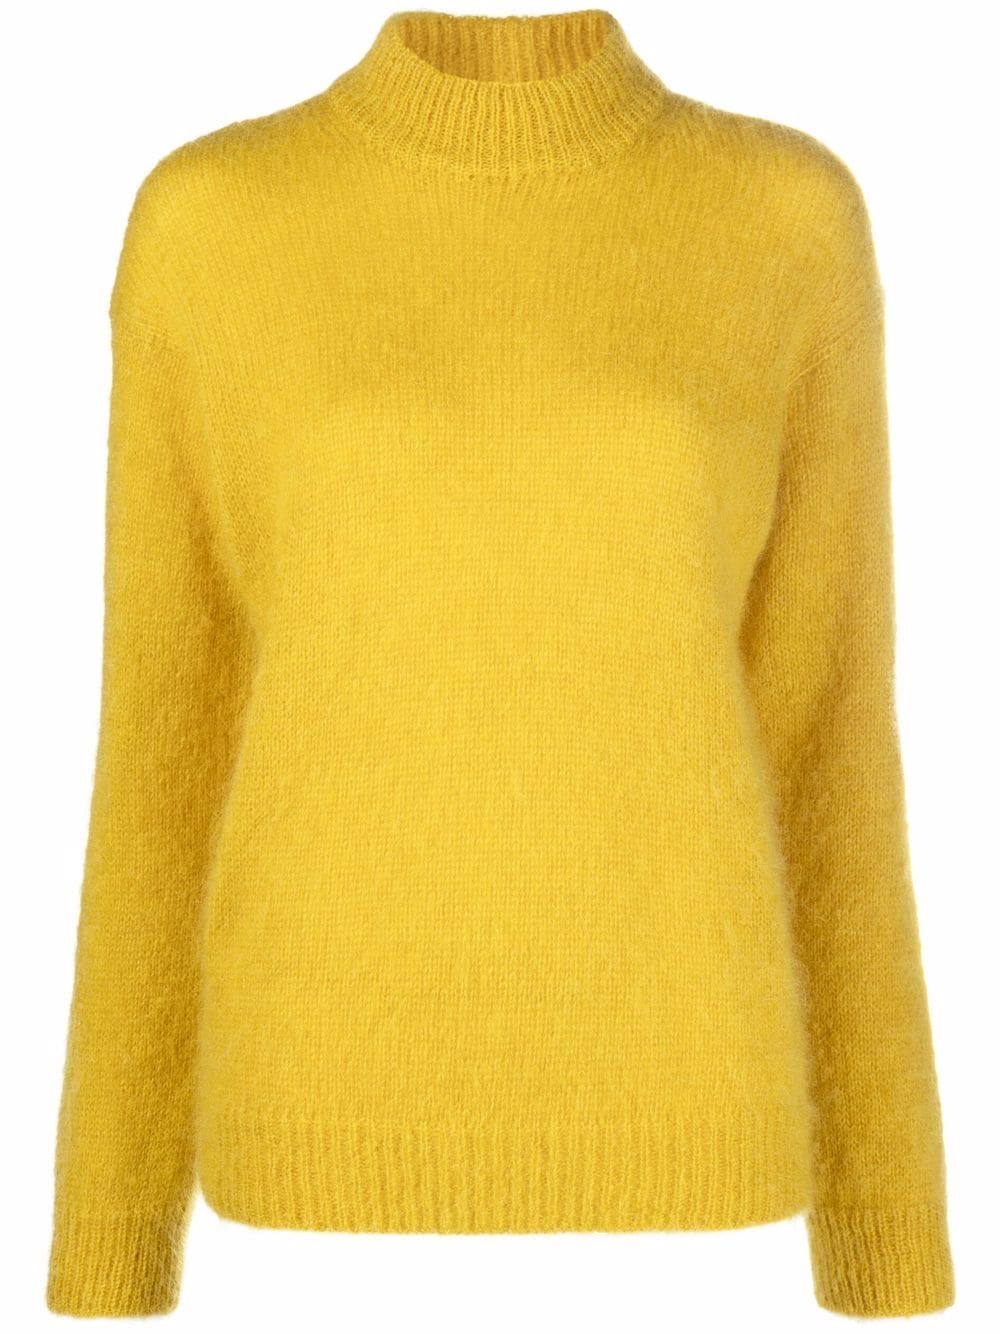 TOM FORD high neck knitted jumper - Yellow von TOM FORD